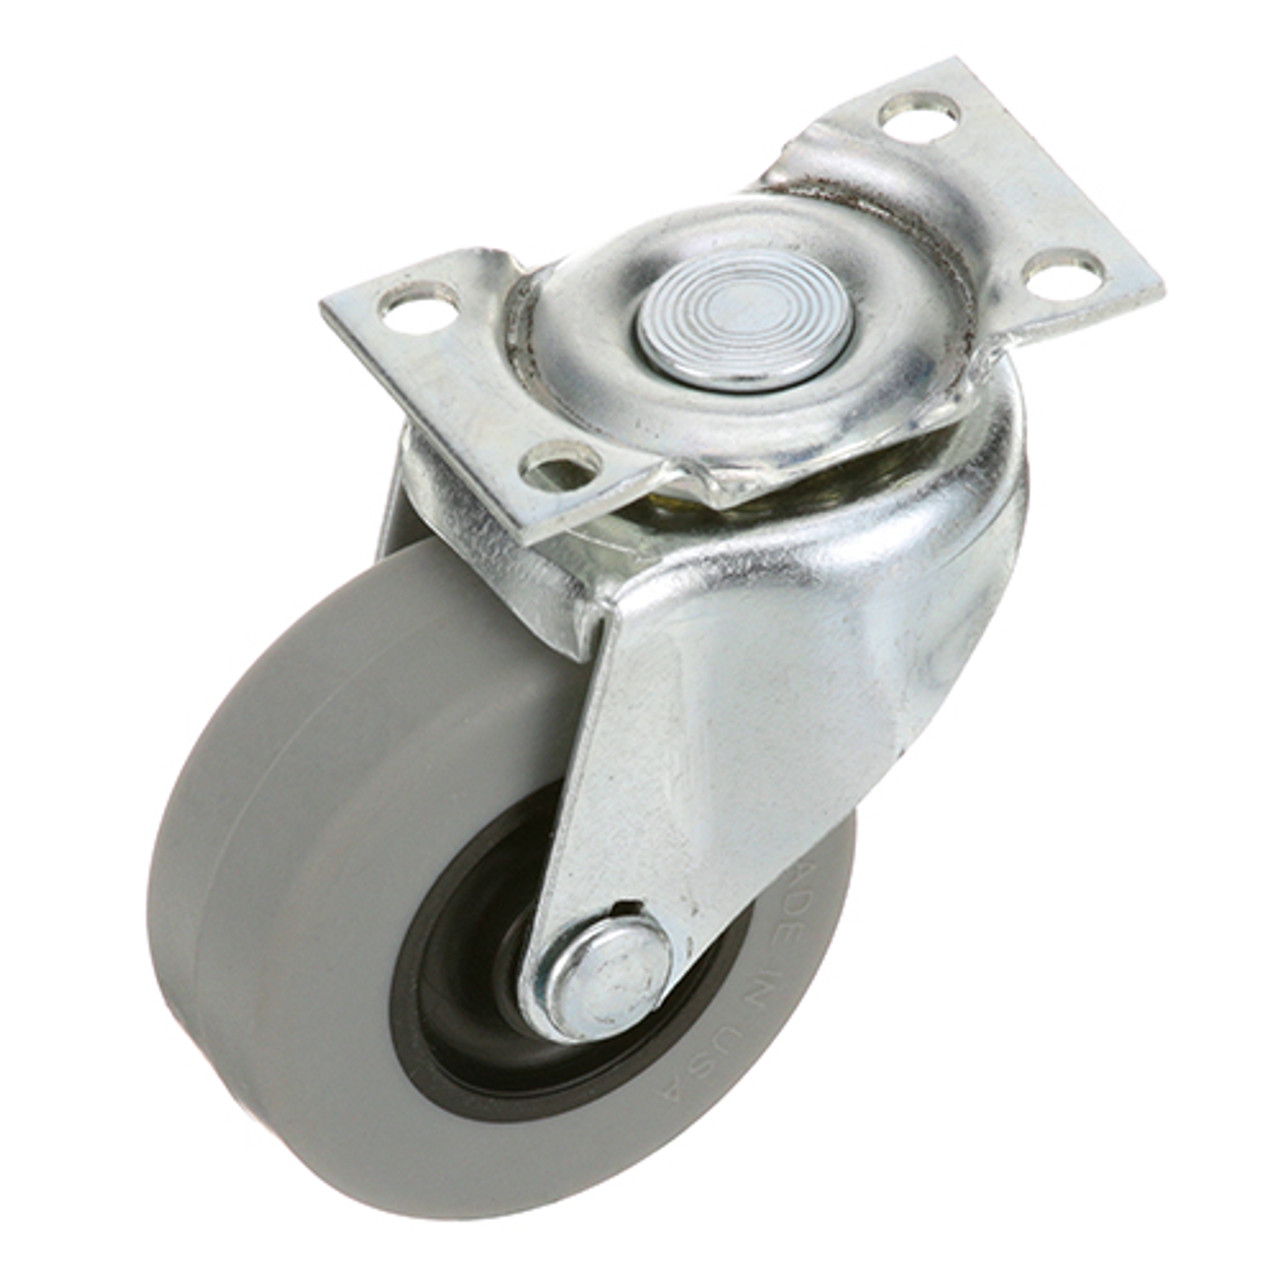 Plate Mount Caster 2 W 1-1/4 X 2-1/8 - Replacement Part For Pitco PTP6071062